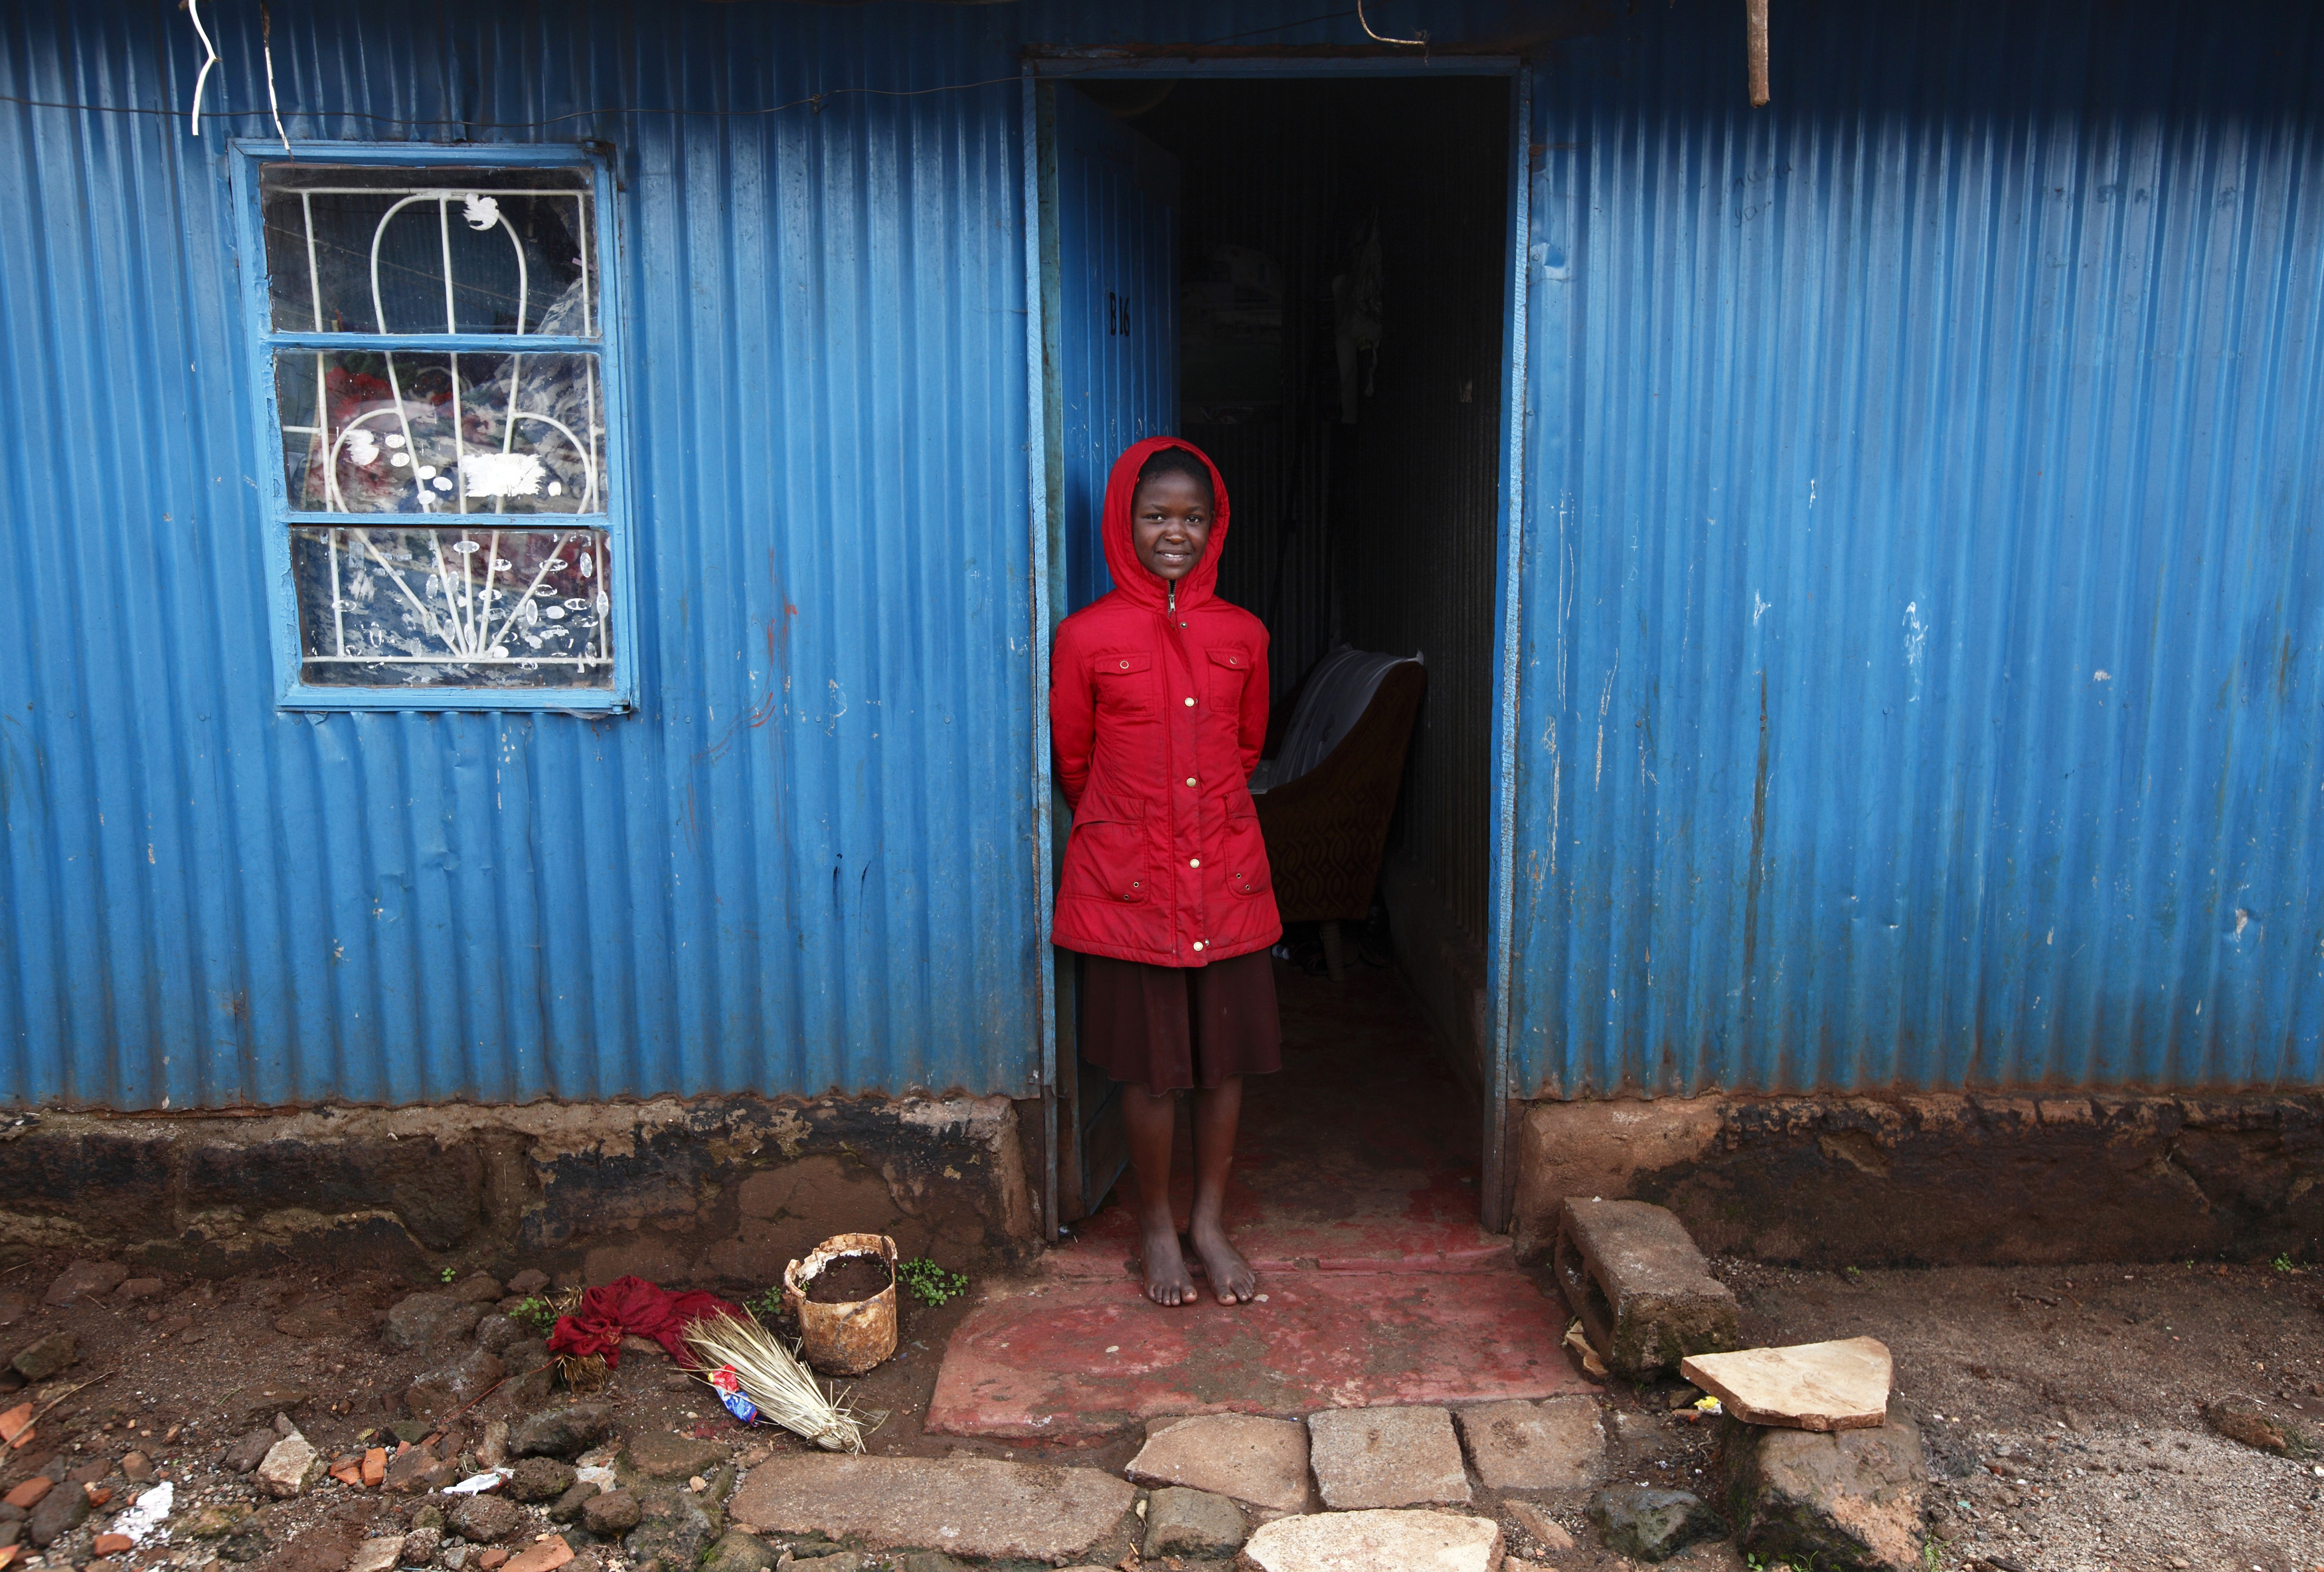 DOCUMENT DATE: April 29, 2013 Fanice Cecilia Nyansiaboka, 12, a participant in the Jesuit-run Upendo programme, stands in the doorway of the home she shares with her father in the Kangemi slum of Nairobi April 23, 2013.